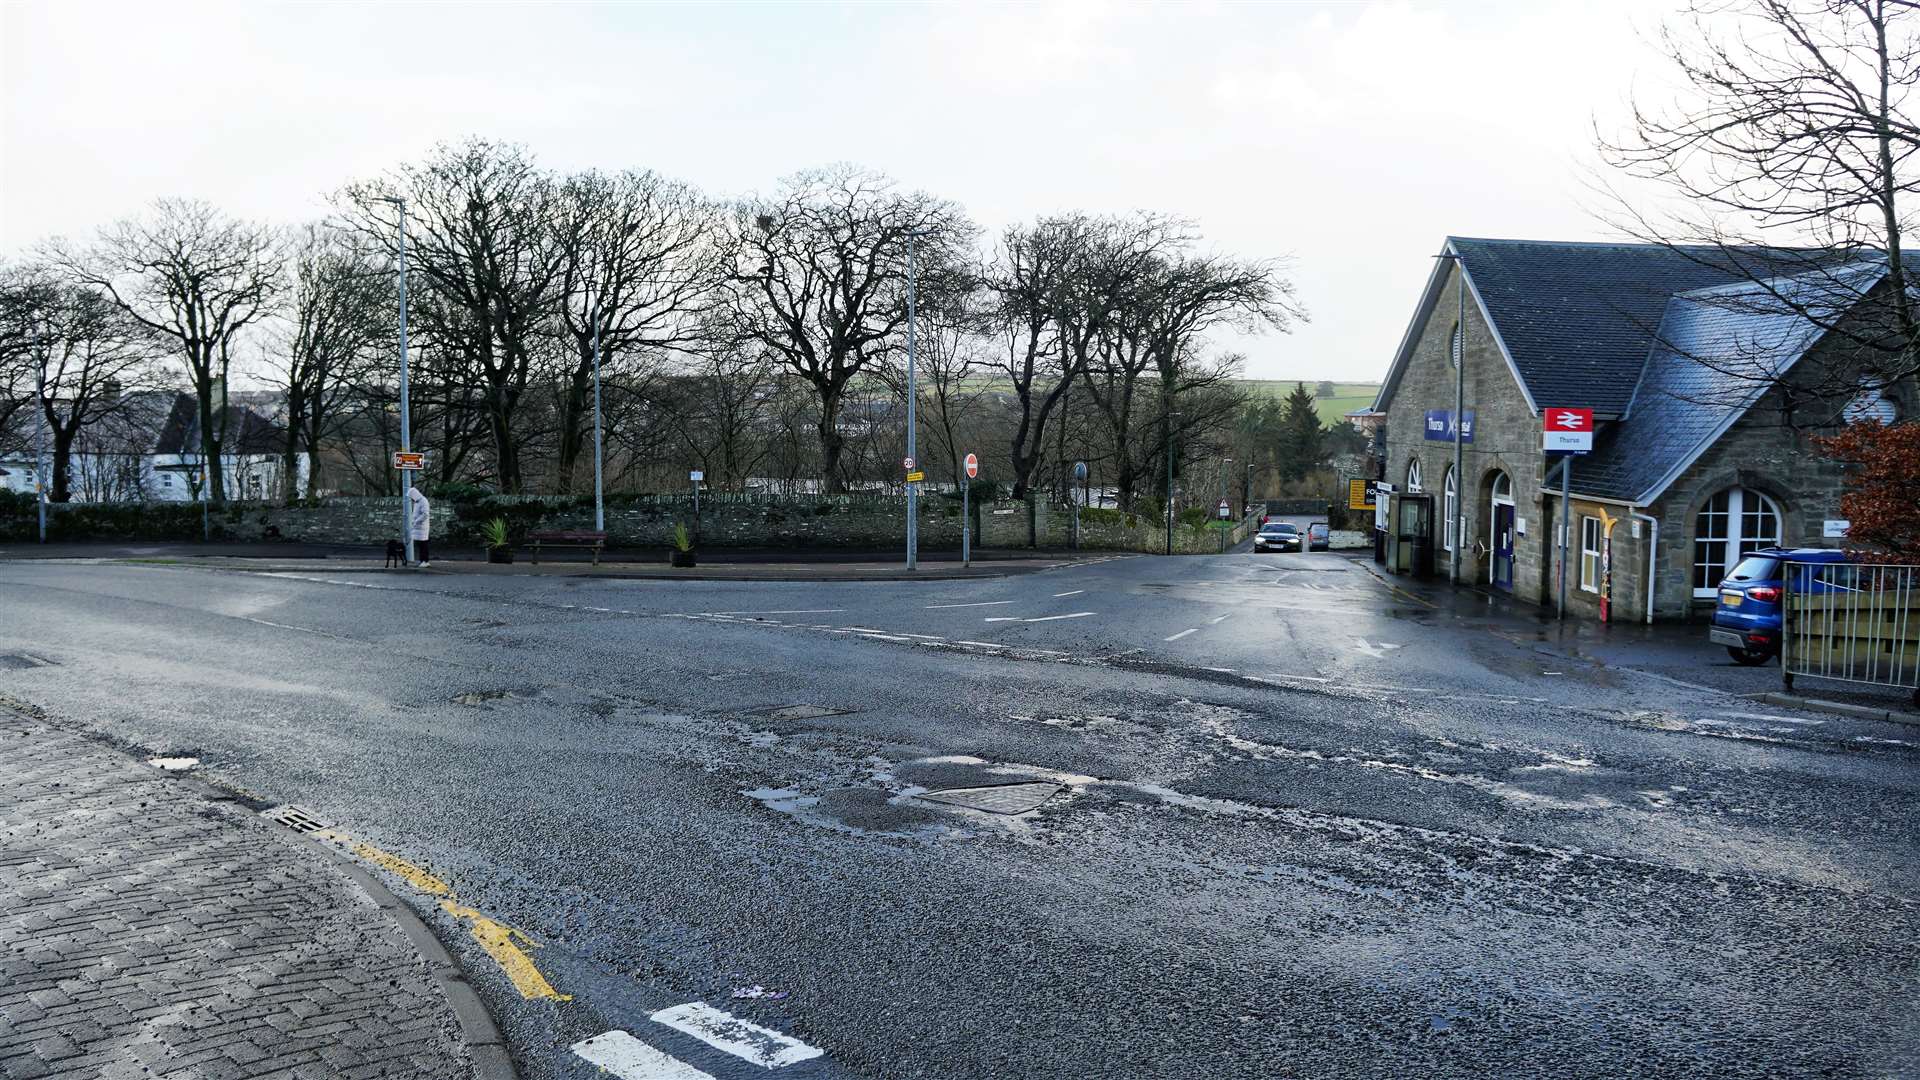 The plans include developing the junction beside the railway station.